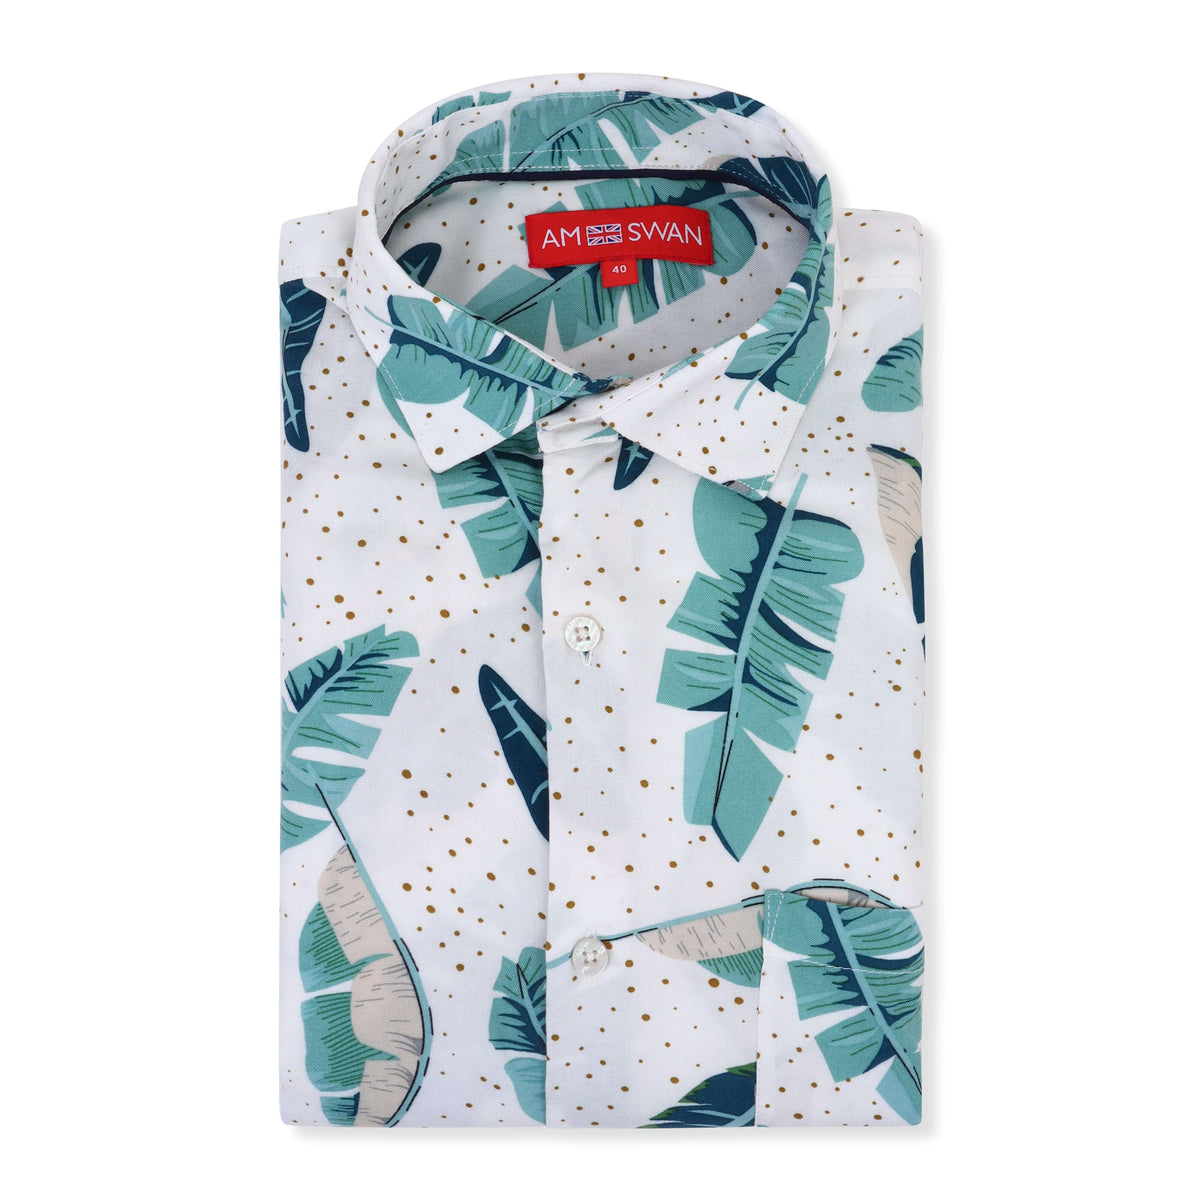 Women's Rayon Shirt With Classic White & Green Tropical Print